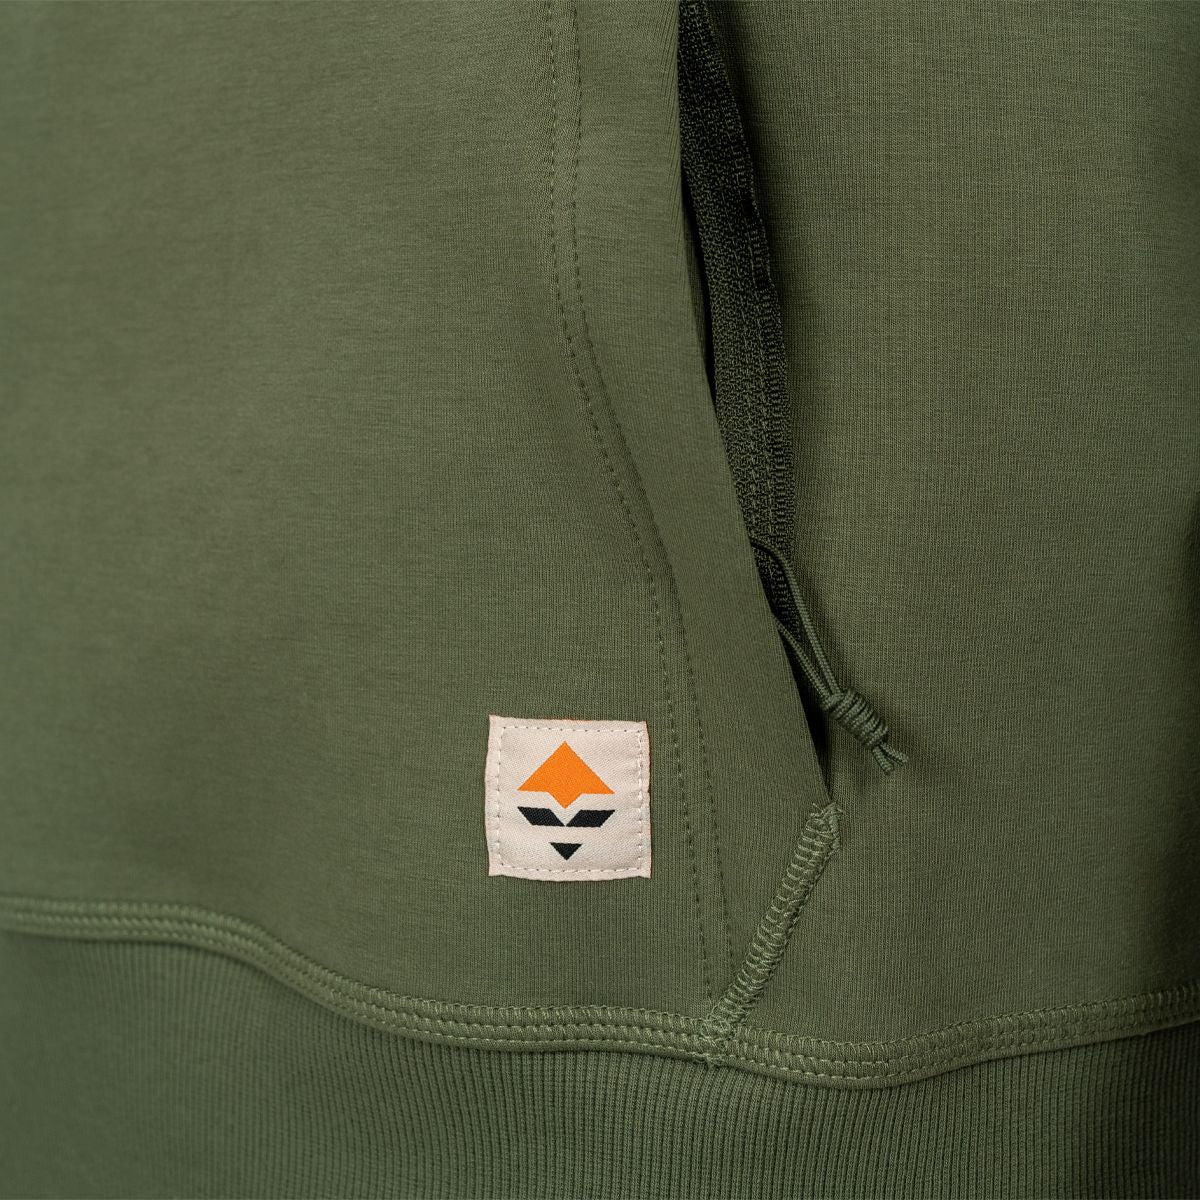 GOHUNT Long Haul Hoodie in Muted Olive by GOHUNT | GOHUNT - GOHUNT Shop